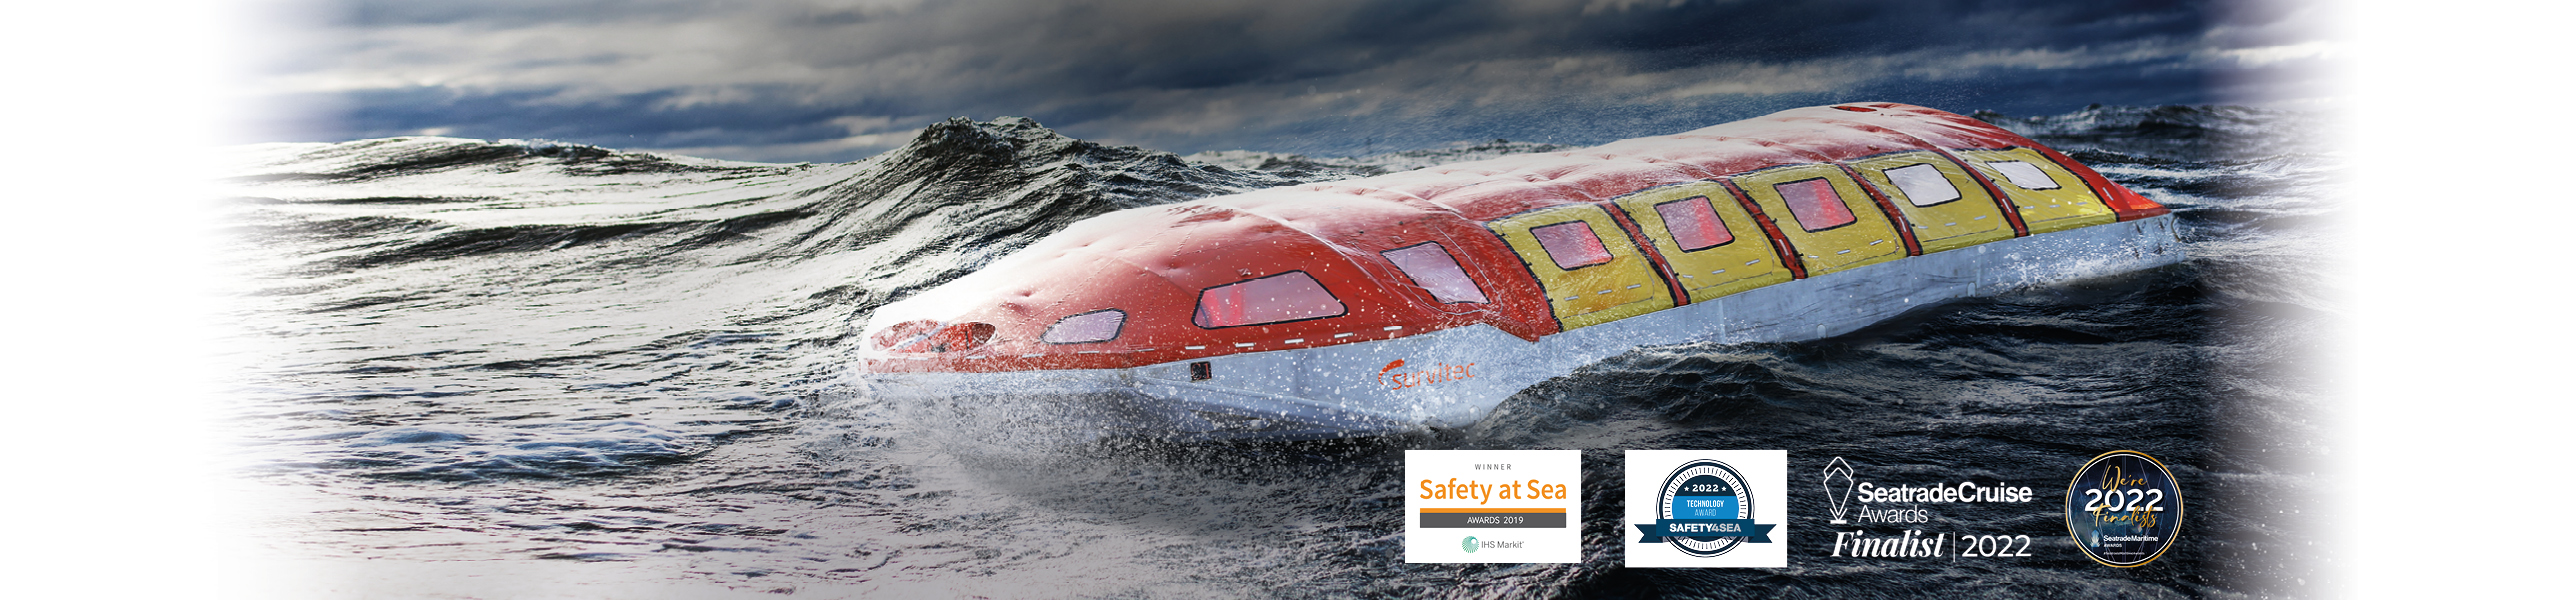 Survitec Seahaven - inflatable lifeboat banner.jpg